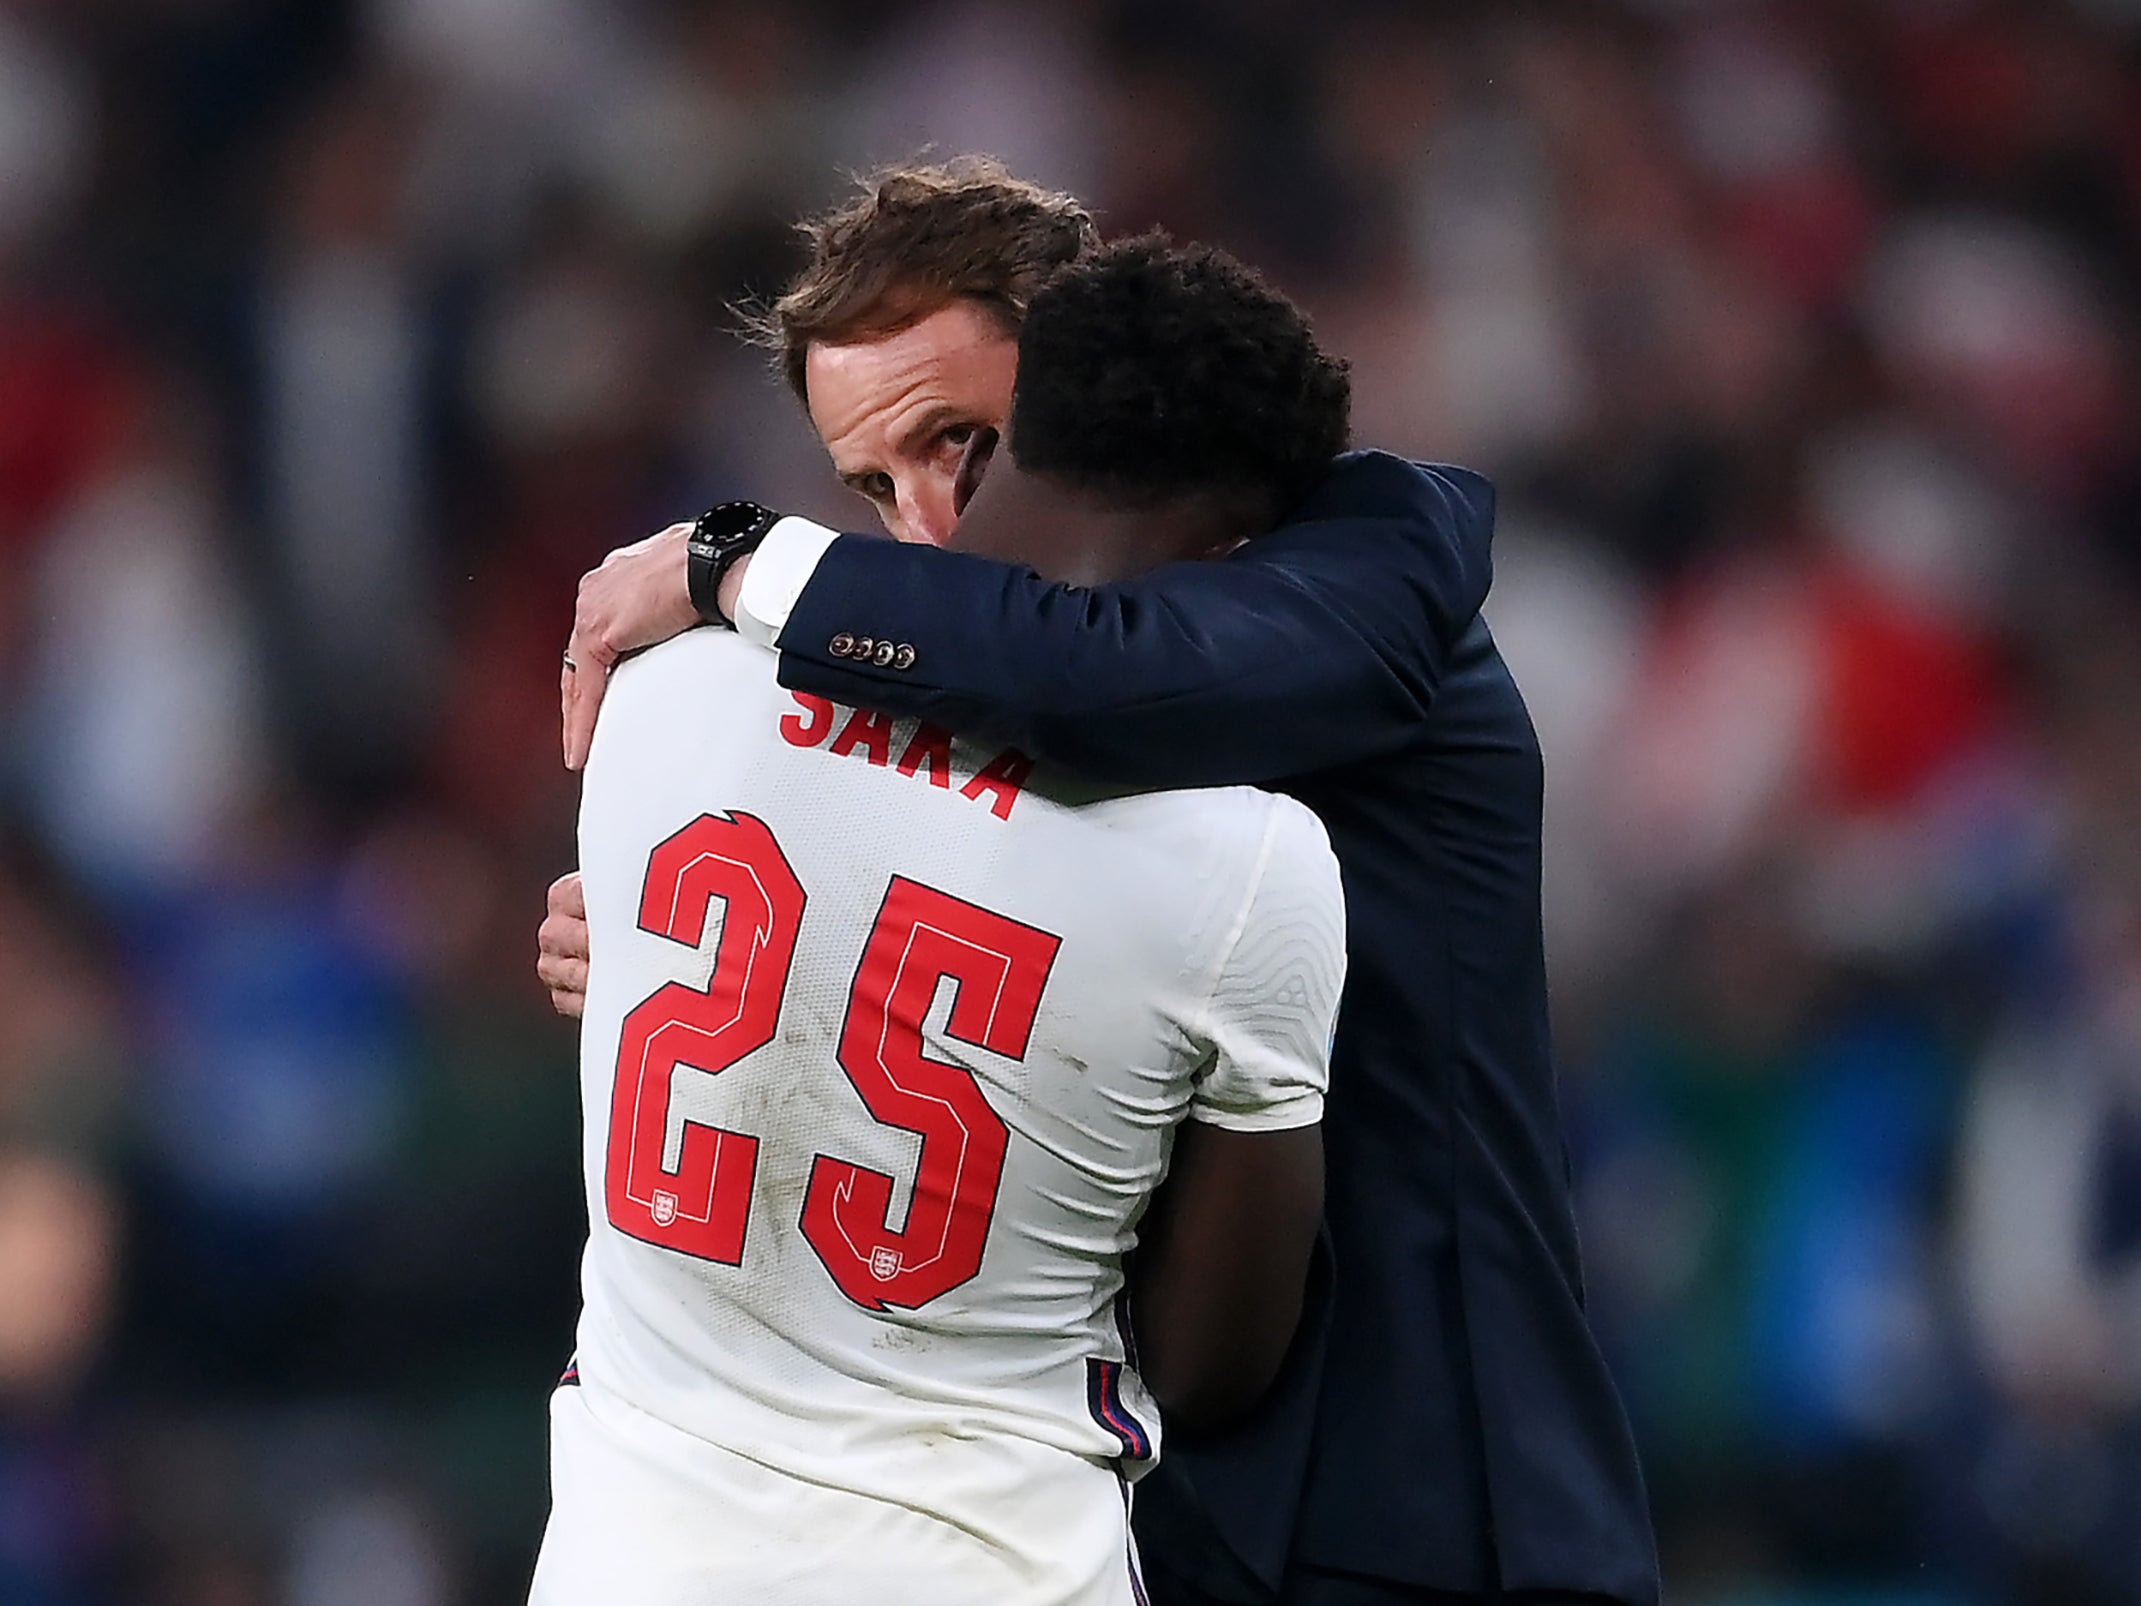 A trio of England players were subjected to racist abuse after missing penalties in the Euro 2020 final